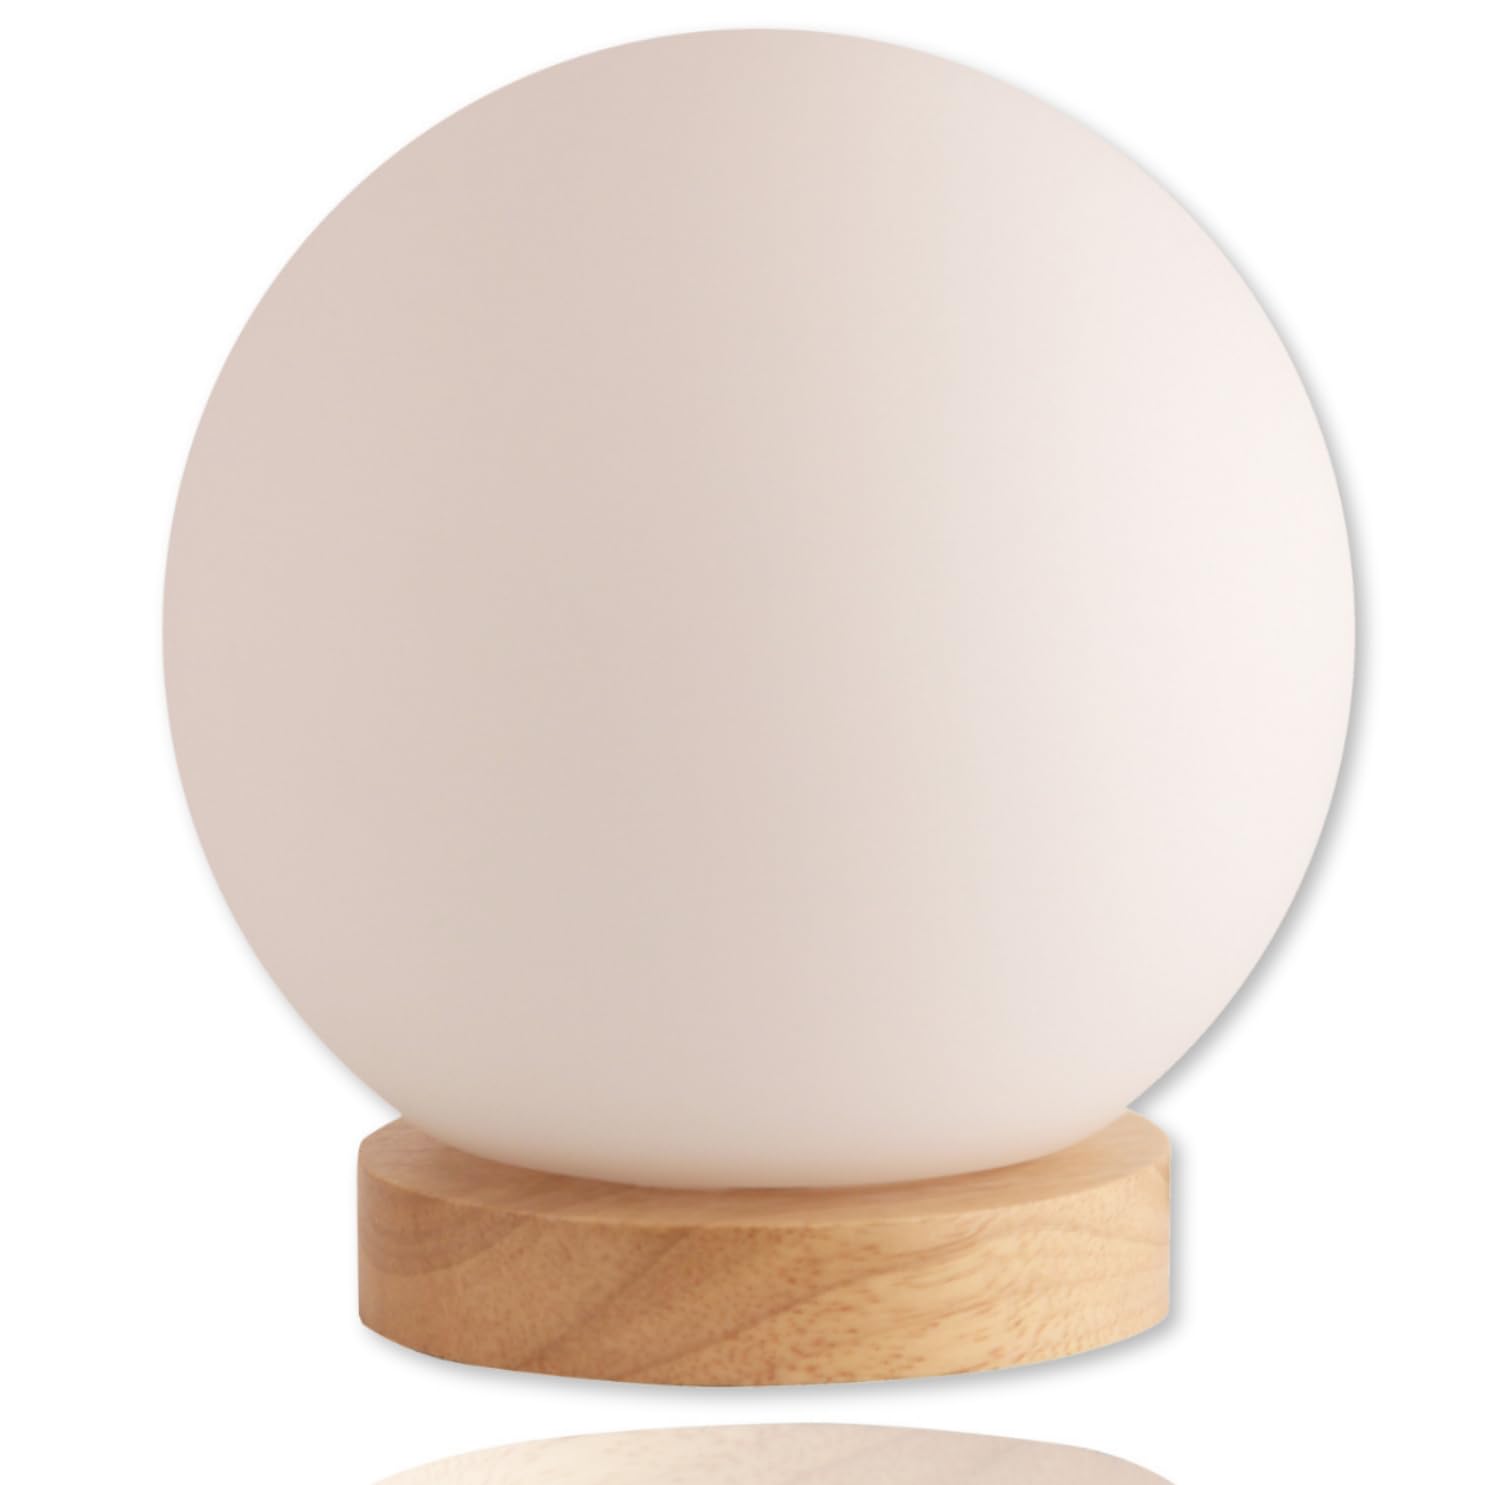 Globe Table Lamp with Included 6 Watt 550 Lumen 2700K LED Bulb - Sphere Lamp with Natural Wooden Base and Round Lamp Glass Shade - Ideal as Mini Table Lamp, Orb Light, Bookshelf Lamp Bedside Ball Lamp